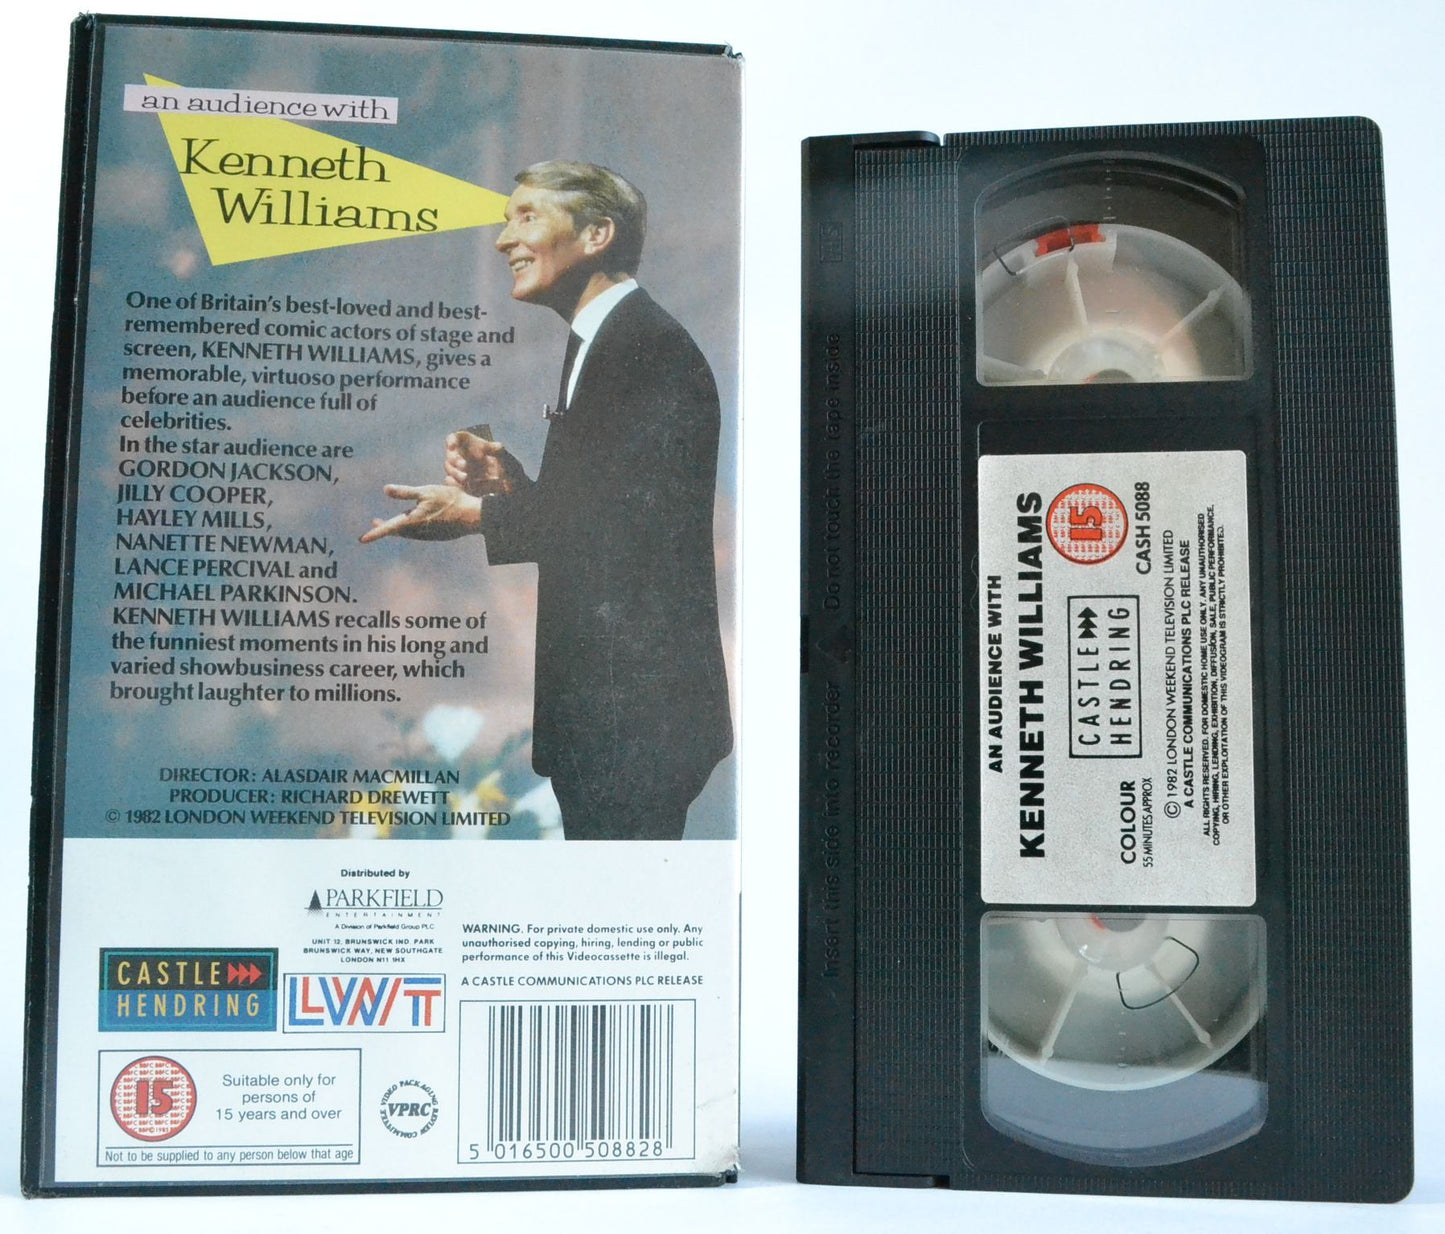 An Audience With Kenneth Williams: Celebrity Audience (1982) Showbusiness VHS-